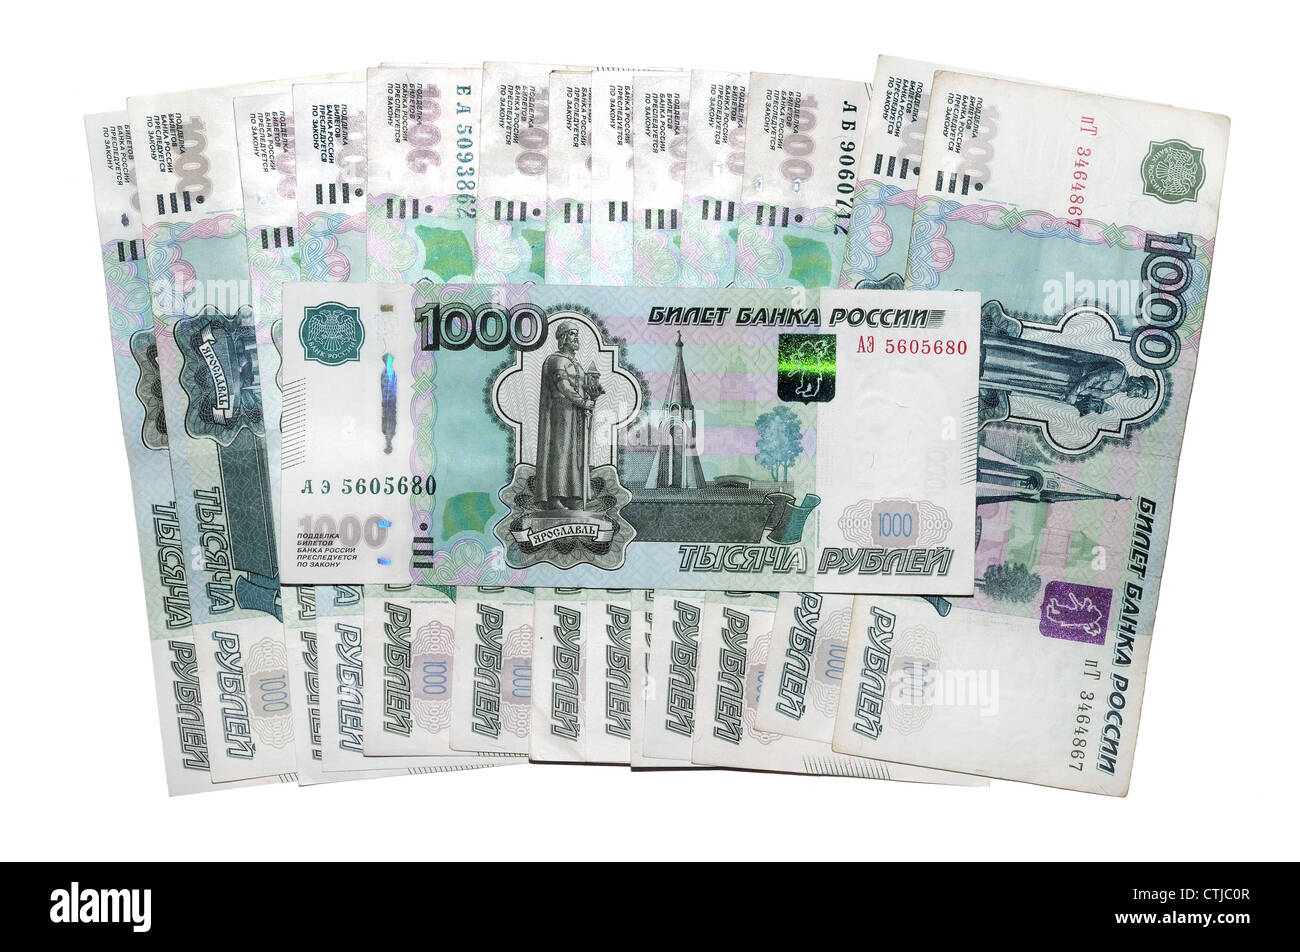 banknotes 1000 Russian rubles Stock Photo